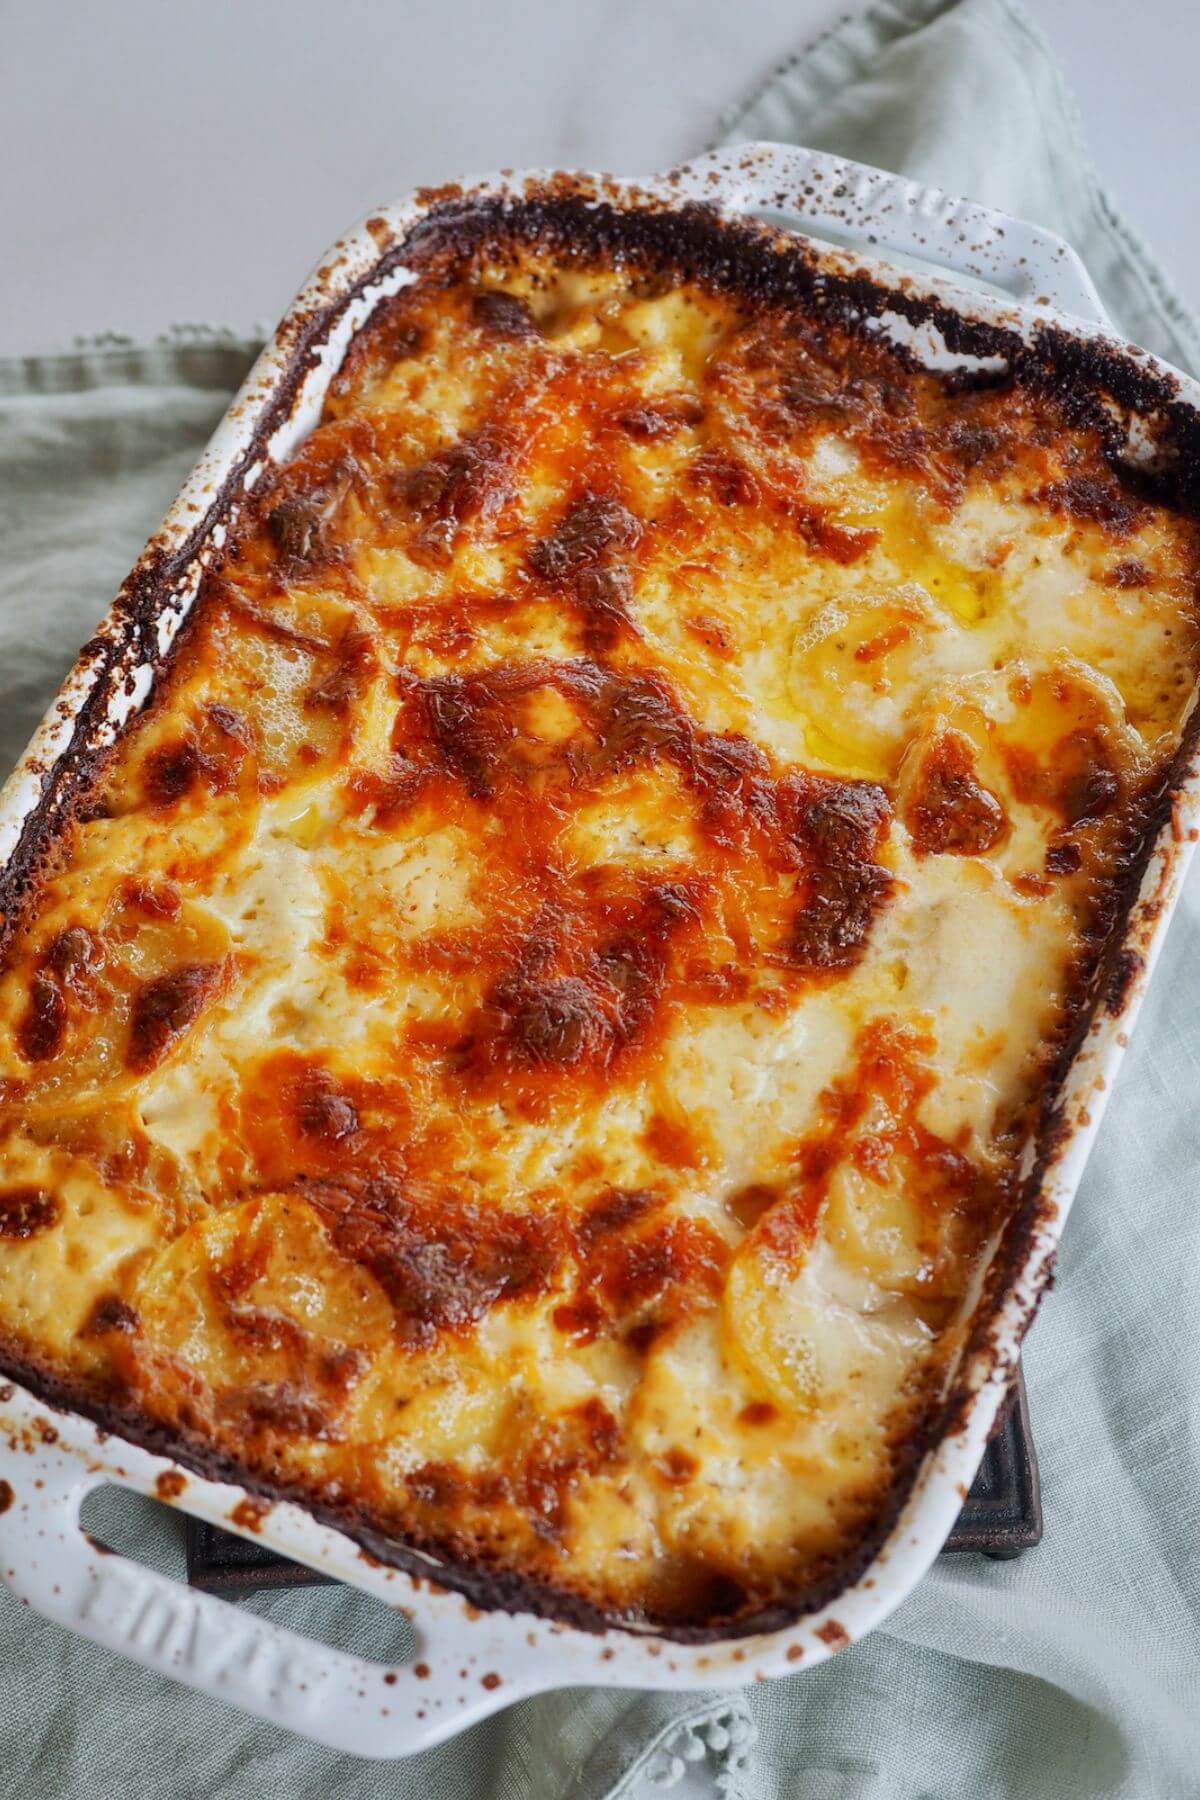 Casserole dish filled with golden and bubbly, cheesy potatoes au gratin.